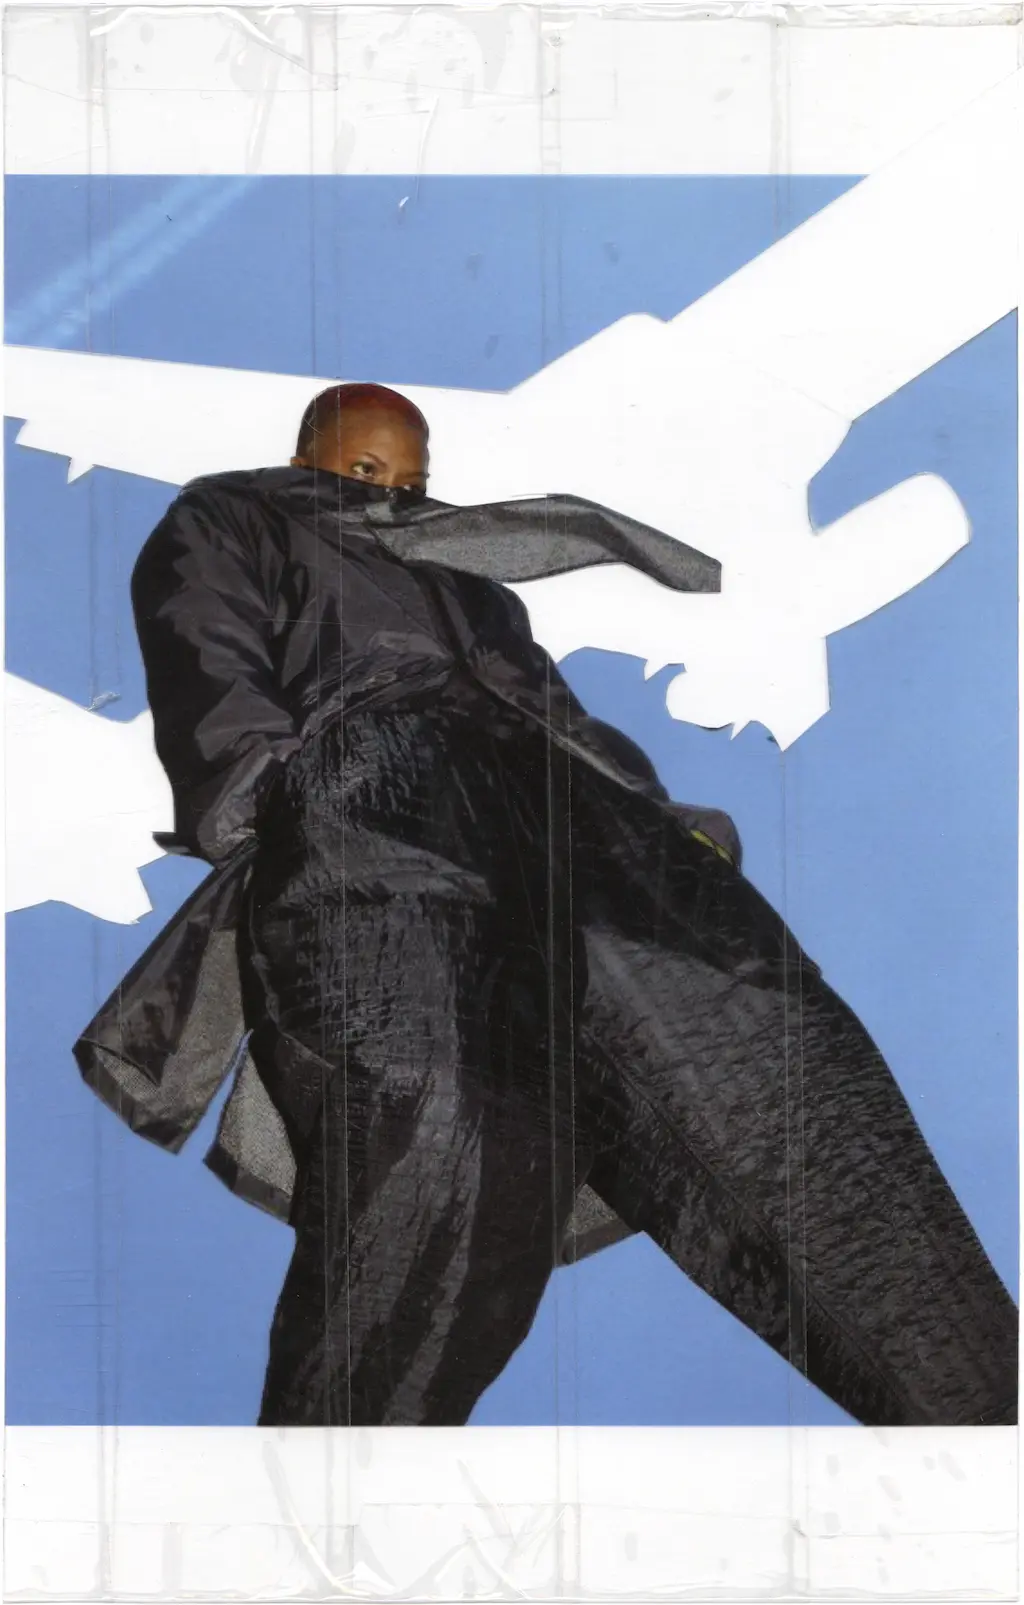 Image of a person taken from very low to the ground, framing them against the blue sky. A low flying airplane encompasses most of the background. The entire image and the acetate on which it was printed is neatly covered with rows of clear packaging tape. The outline of the airplane has been crudely cut out of the transparent tape with a box cutter which allowed the alcohol wash to completely remove it while leaving the person and the sky untouched.